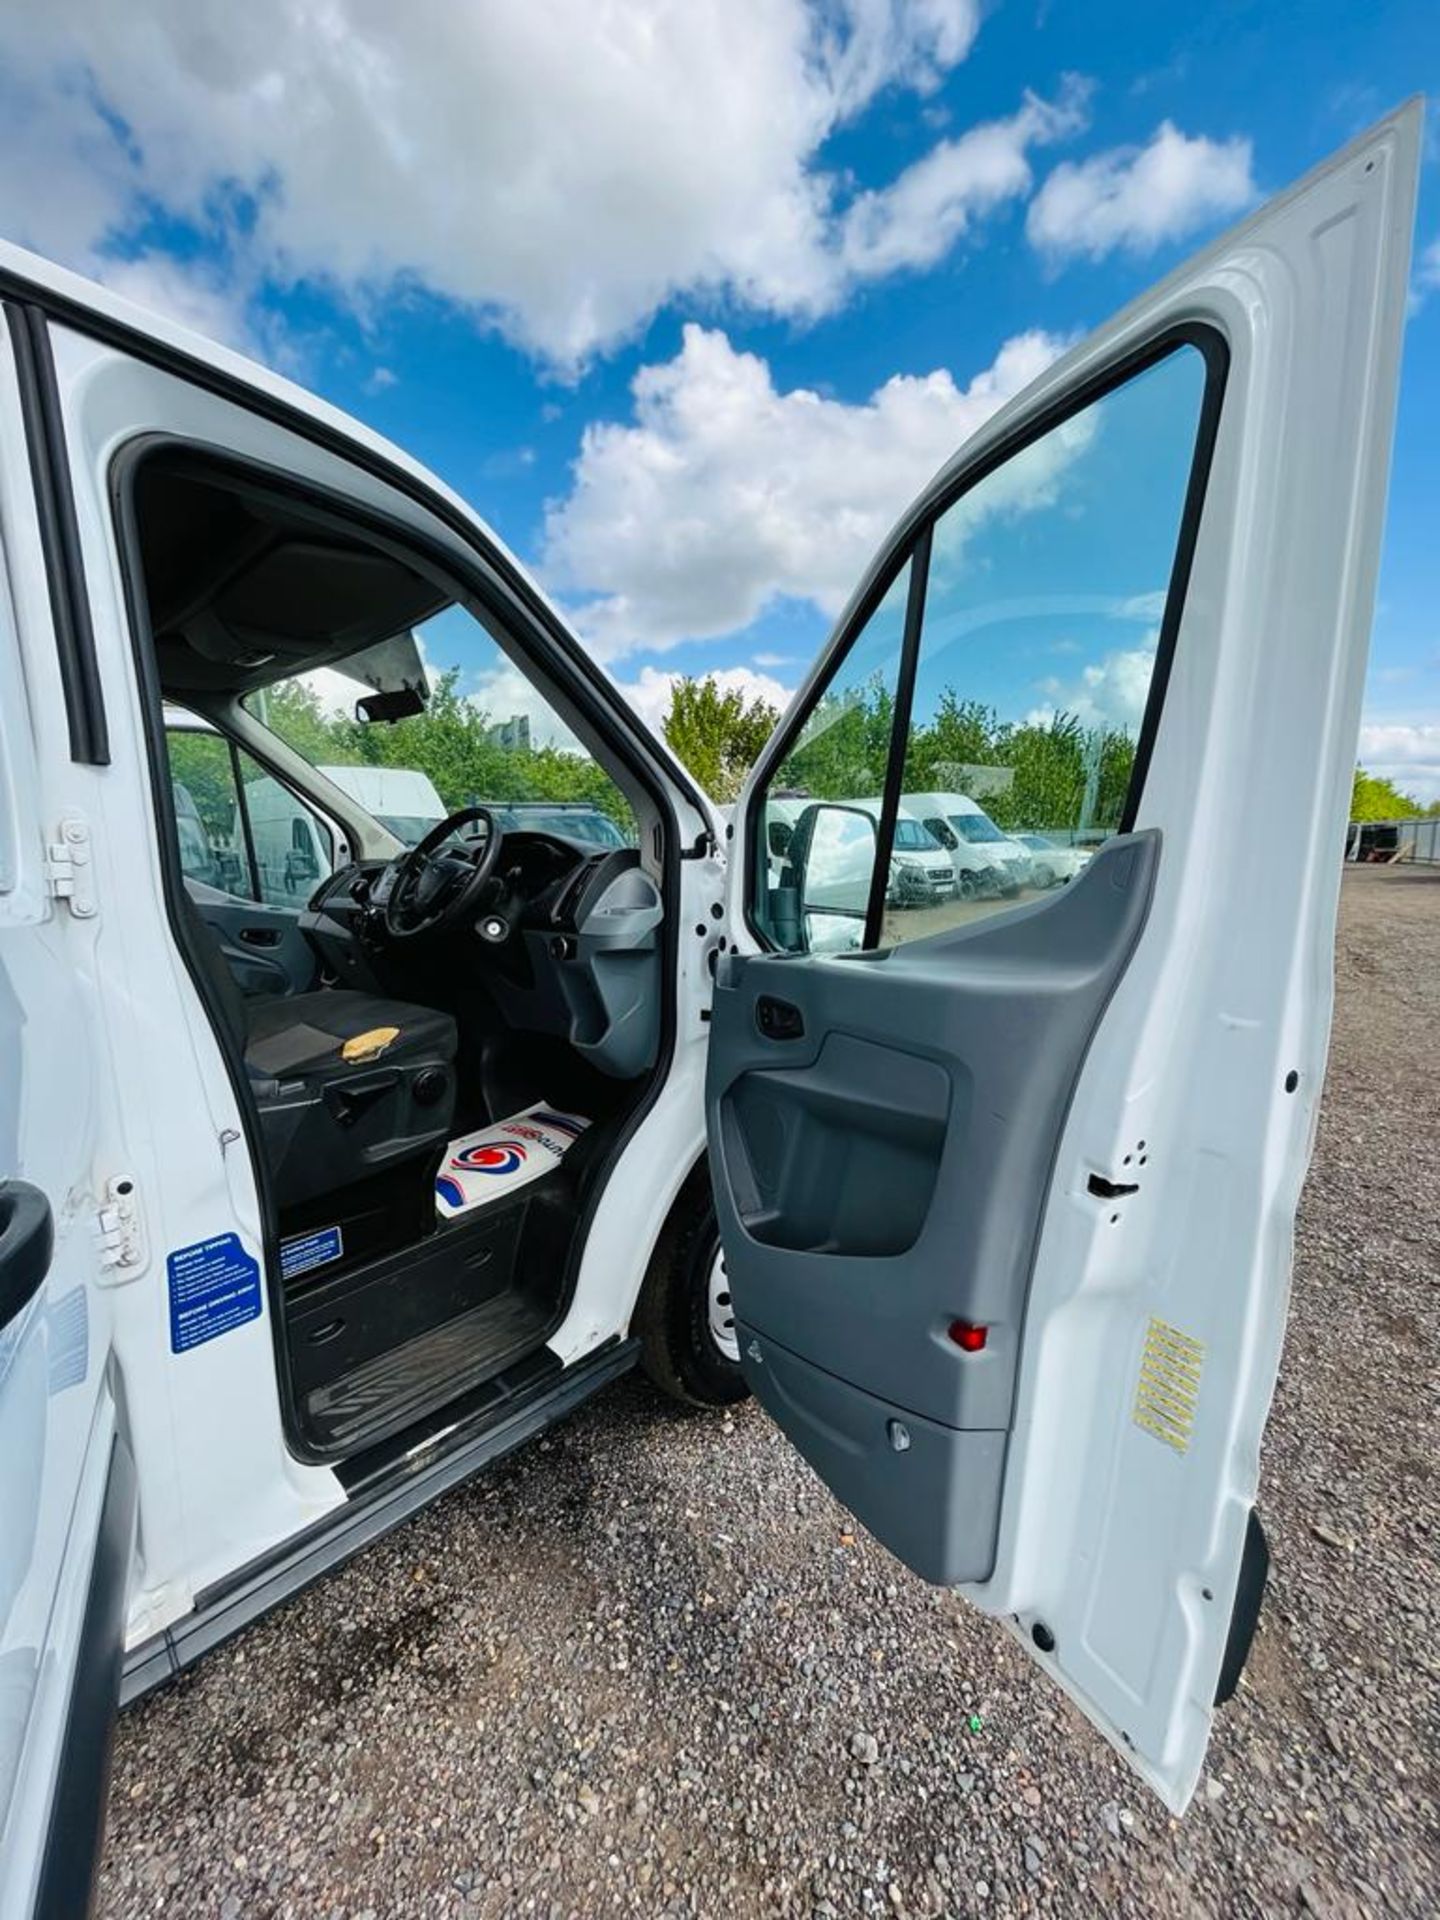 ** ON SALE ** Ford Transit 2.2 TDCI Double Cab Tipper 2015 '65 Reg' - Only 130,298 Miles - Image 12 of 29